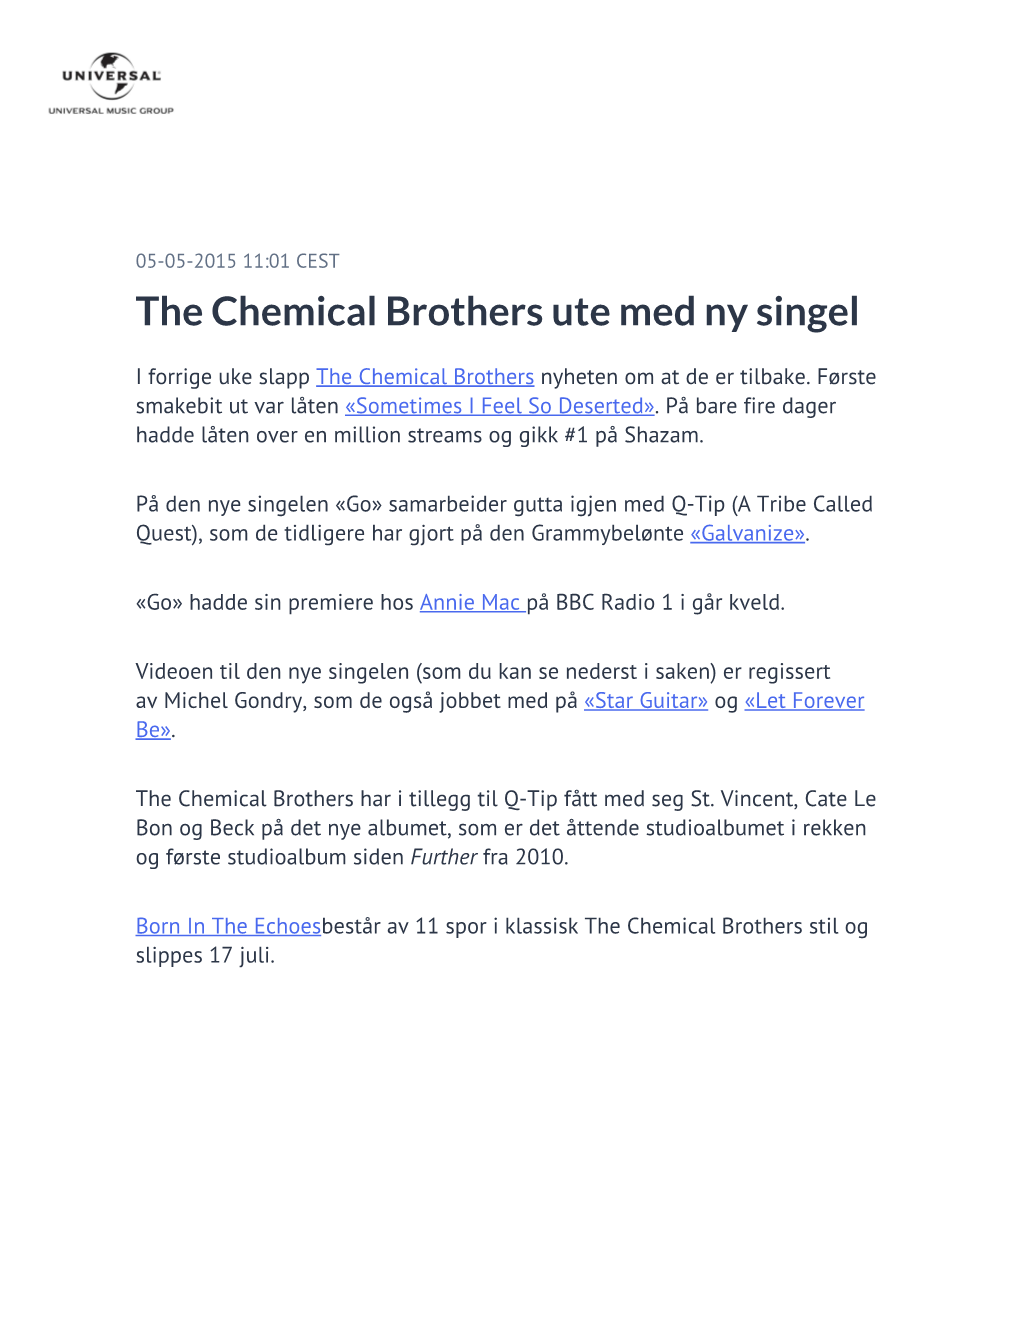 The Chemical Brothers Ute Med Ny Singel